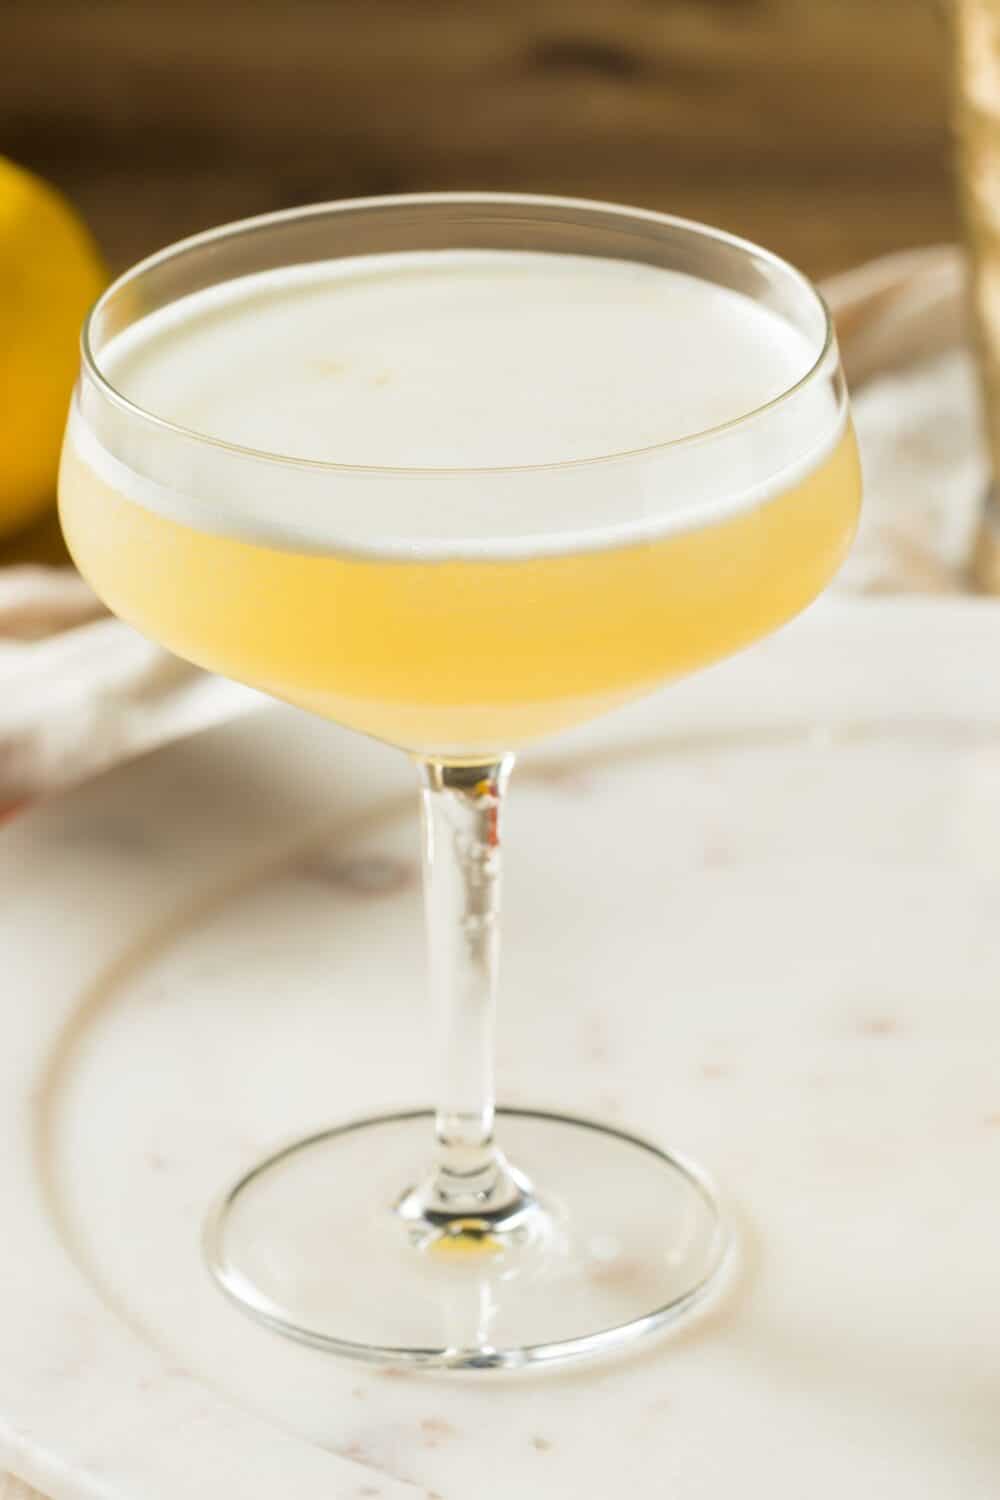 A golden-hued cocktail made with gin, fresh lemon juice, and a sugar-free honey syrup, shaken and strained into a glass.